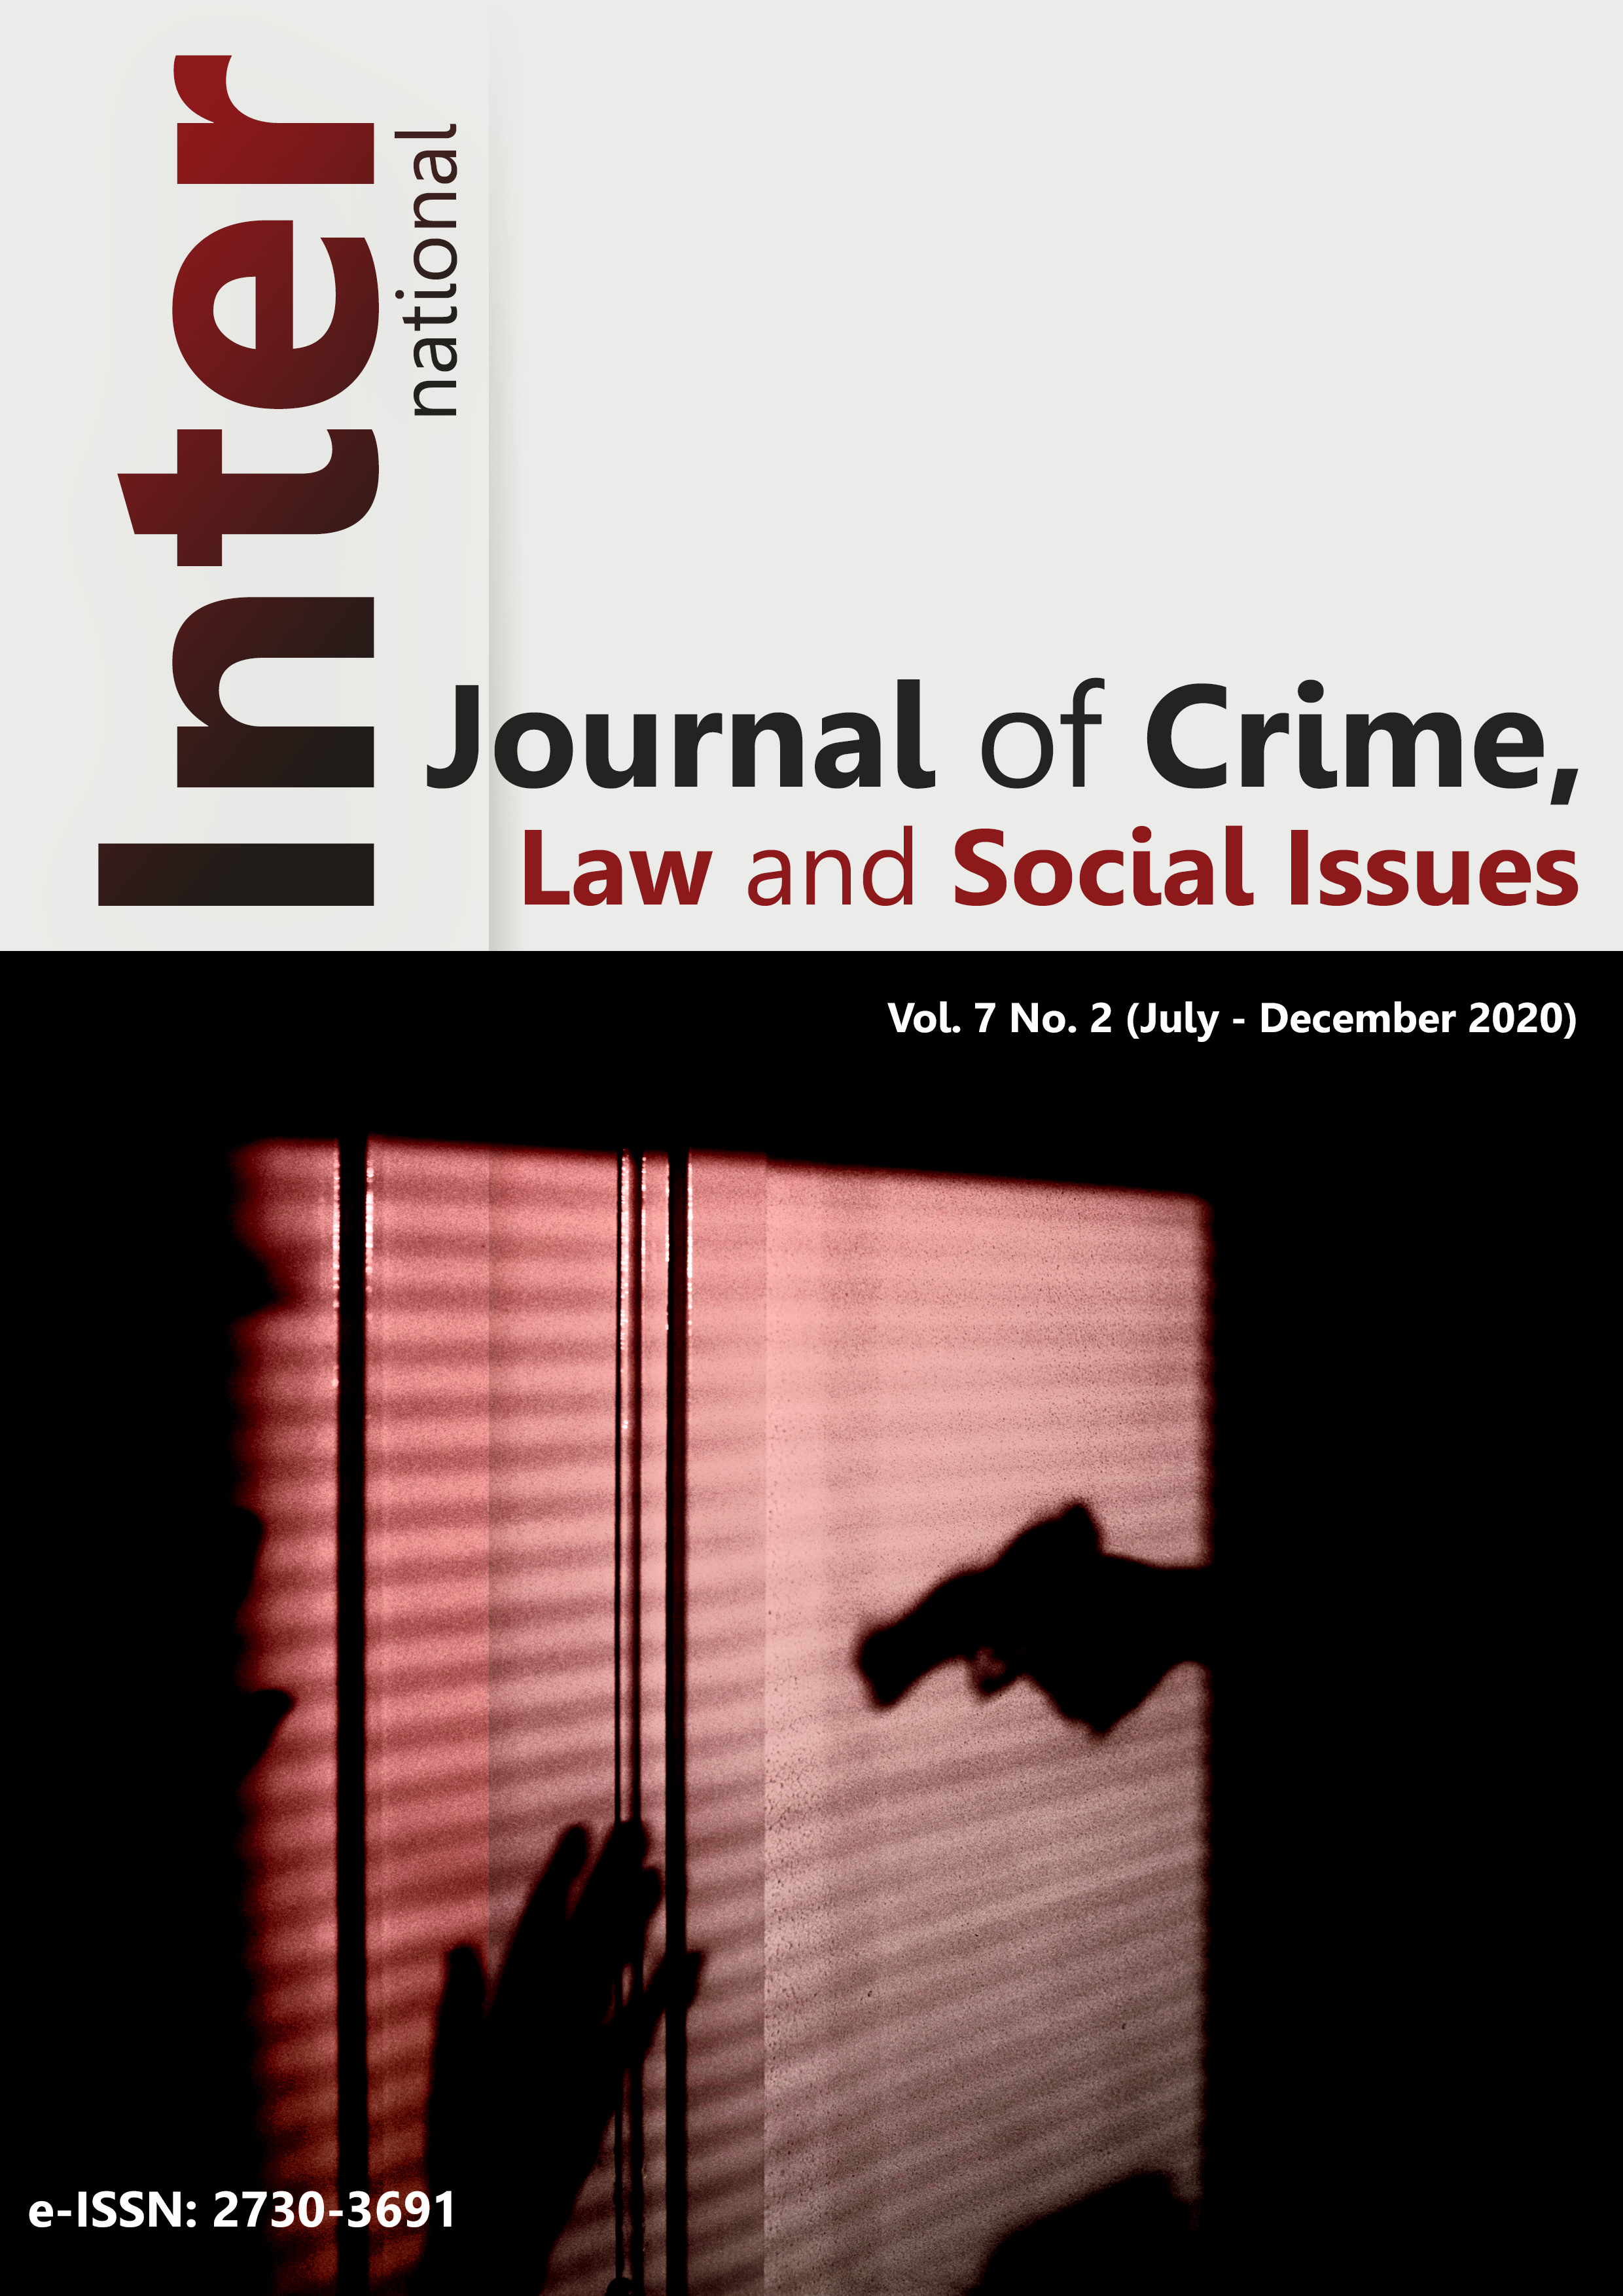 					View Vol. 7 No. 2 (2020): International Journal of Crime, Law and Social Issues, Vol. 7, No. 2, 2020
				